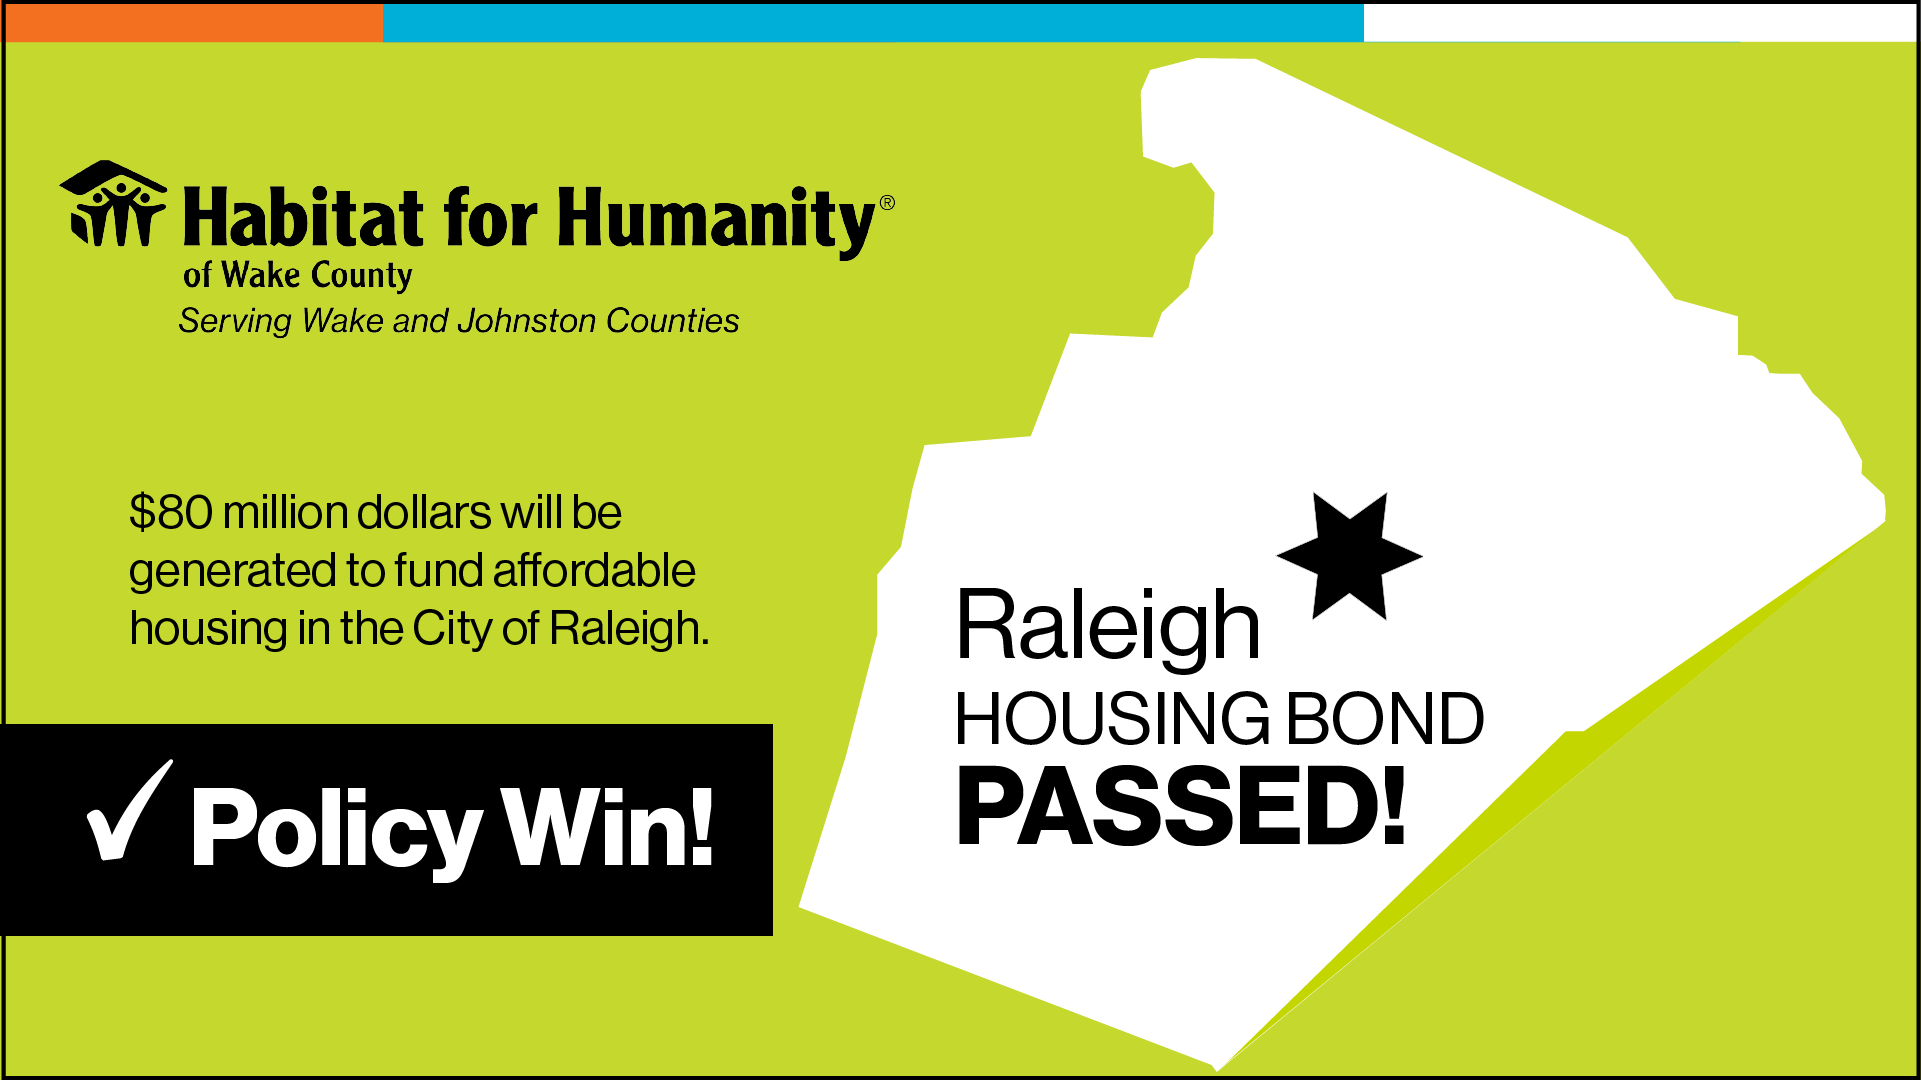 Policy Win! The Affordable Housing Bond passed!